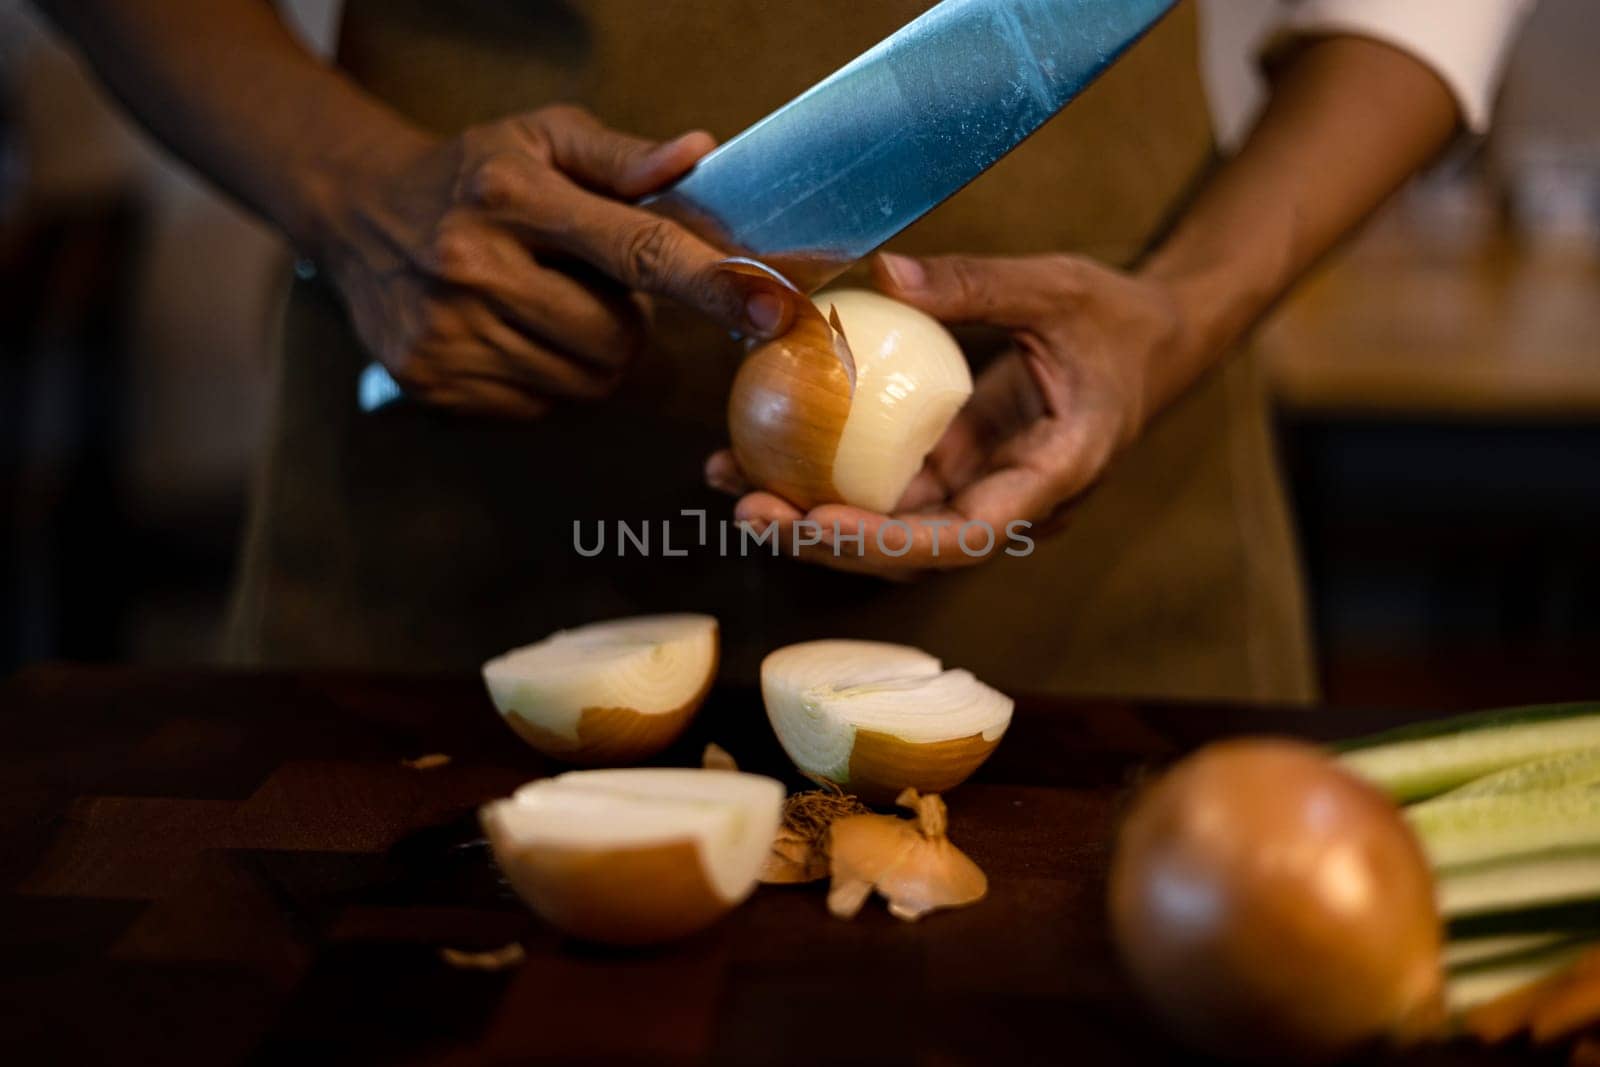 Women's hands with a sharp knife peeling white onions in the kitchen.